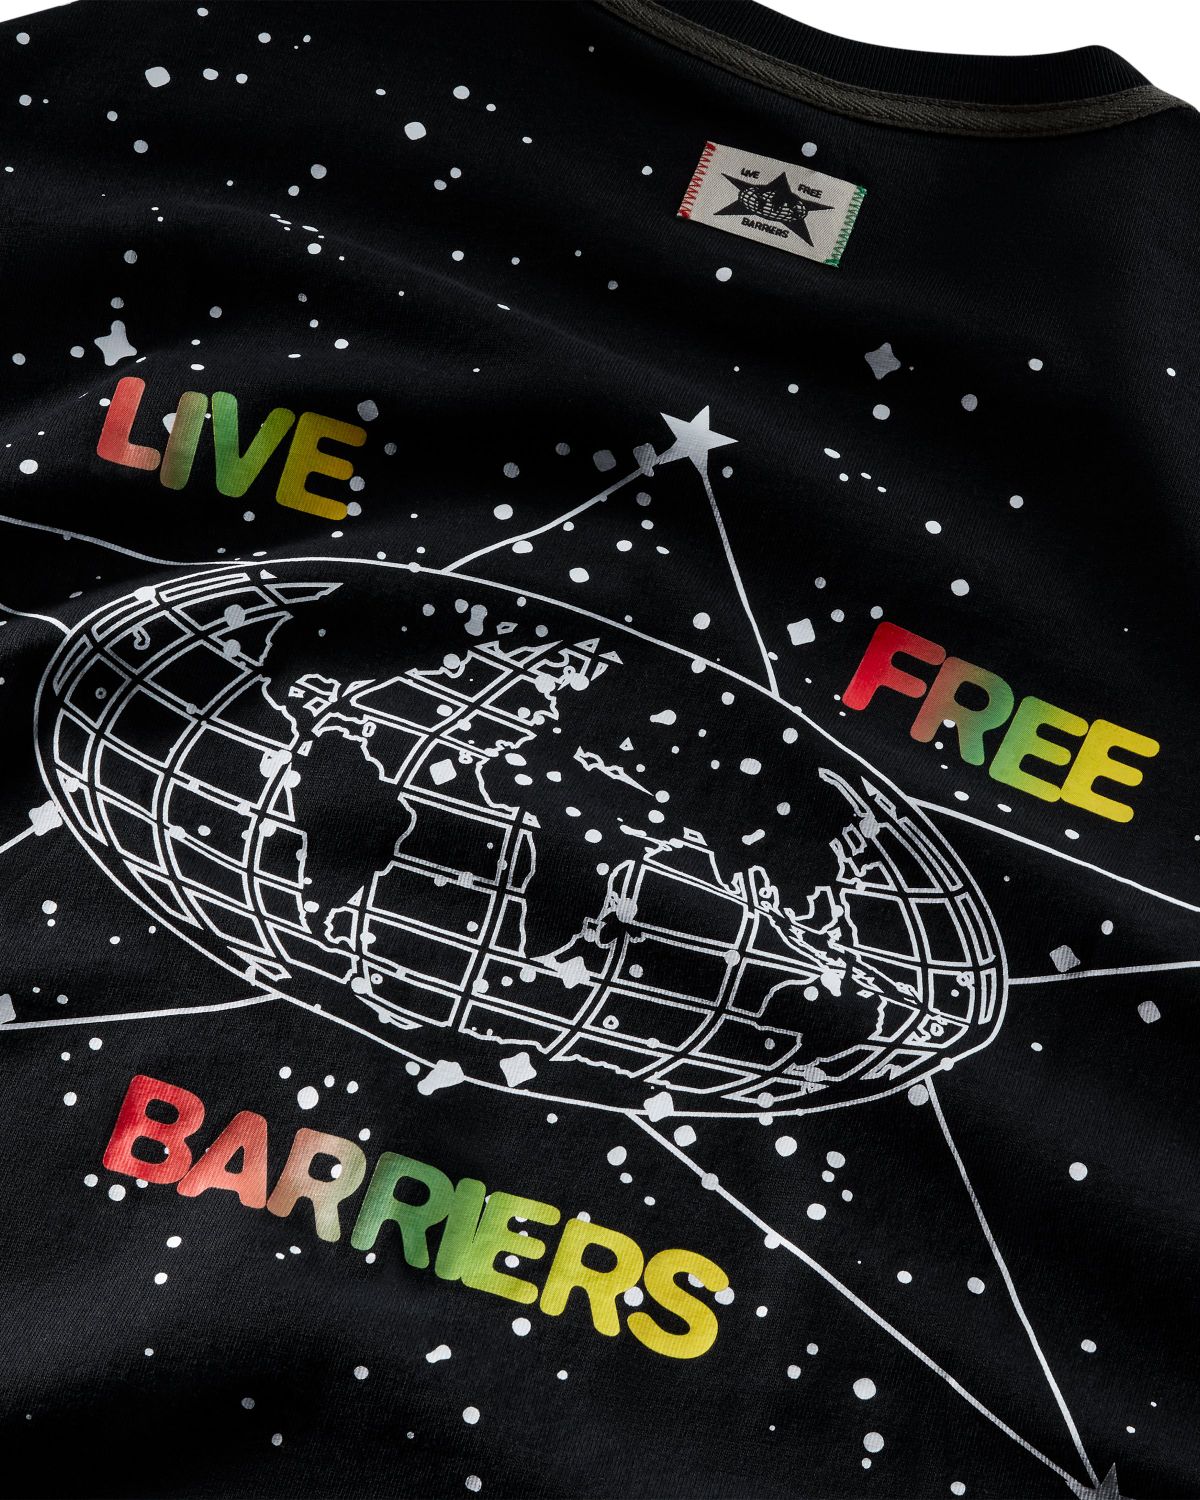 Converse x Barriers – Court Ready Crossover Tee Black - T-shirts - Black - Image 6